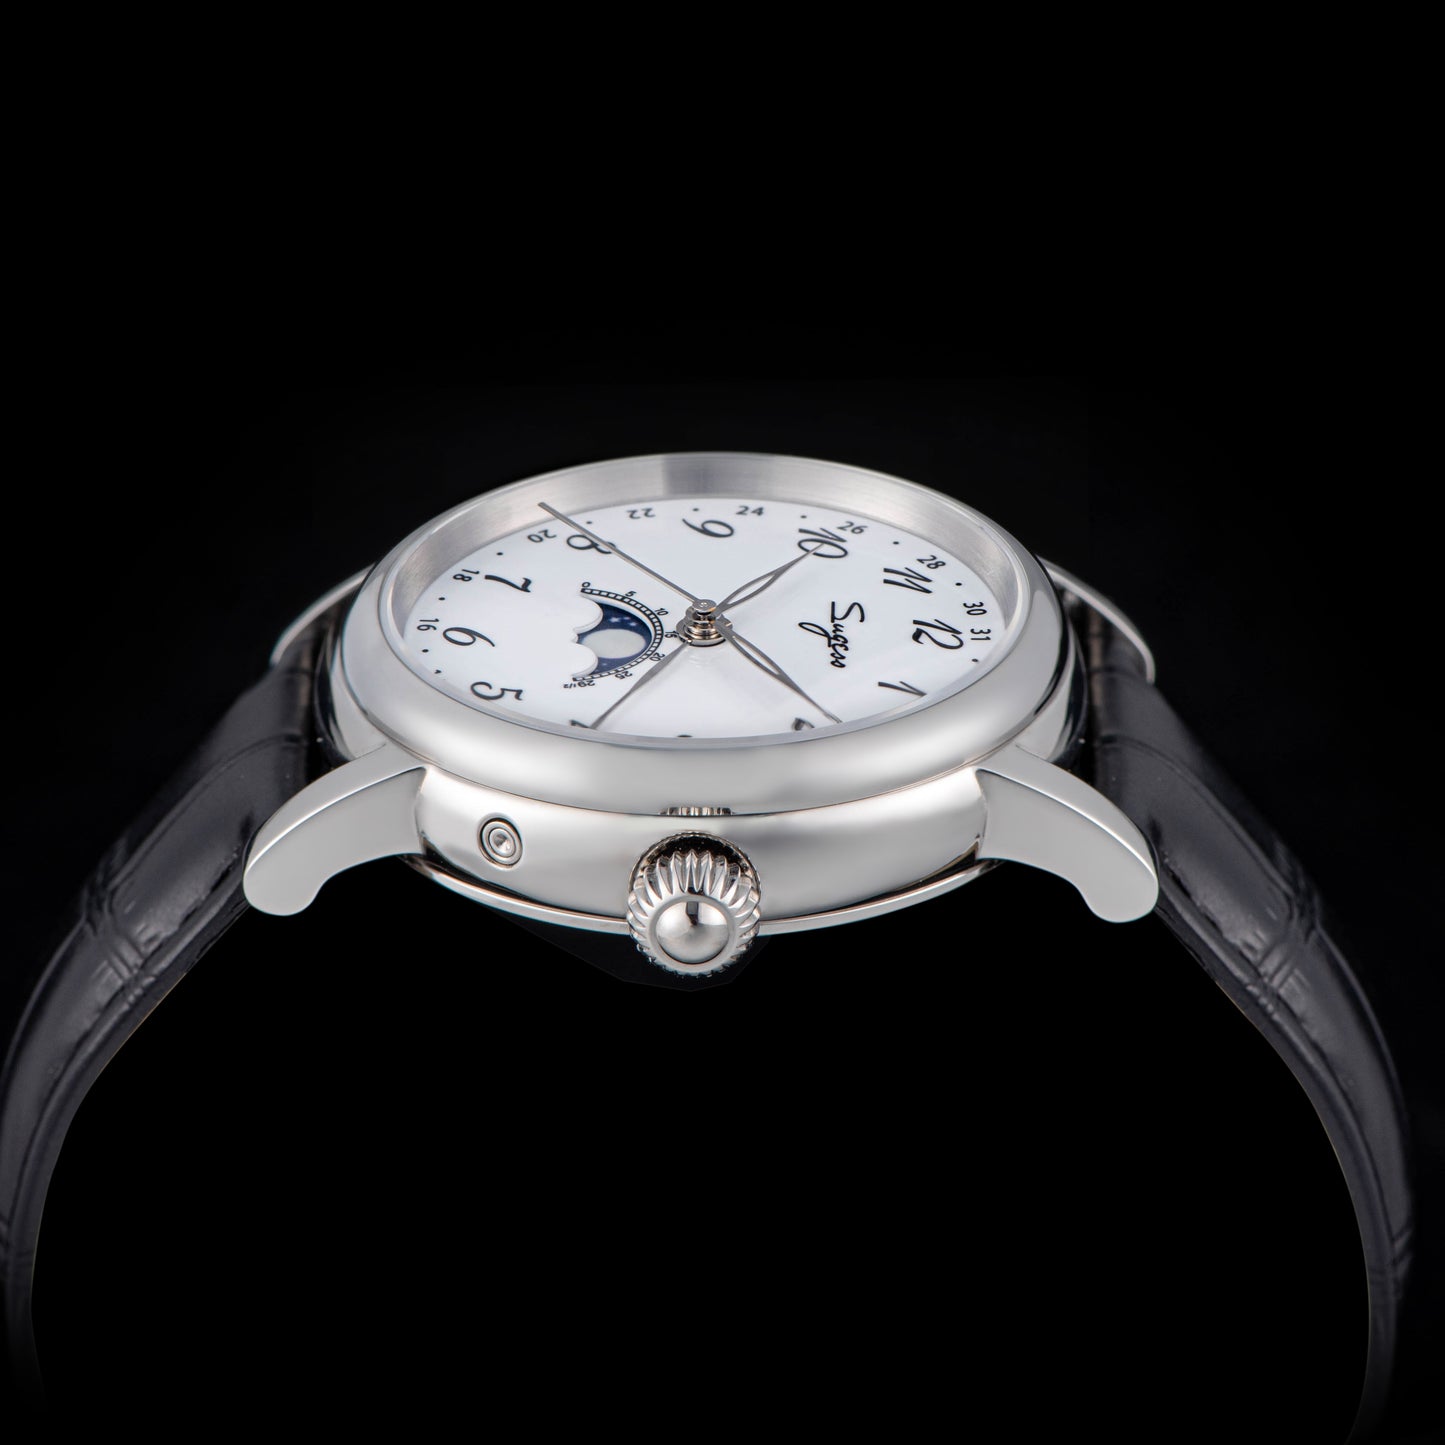 MoonPhase Master Automatic S395.01